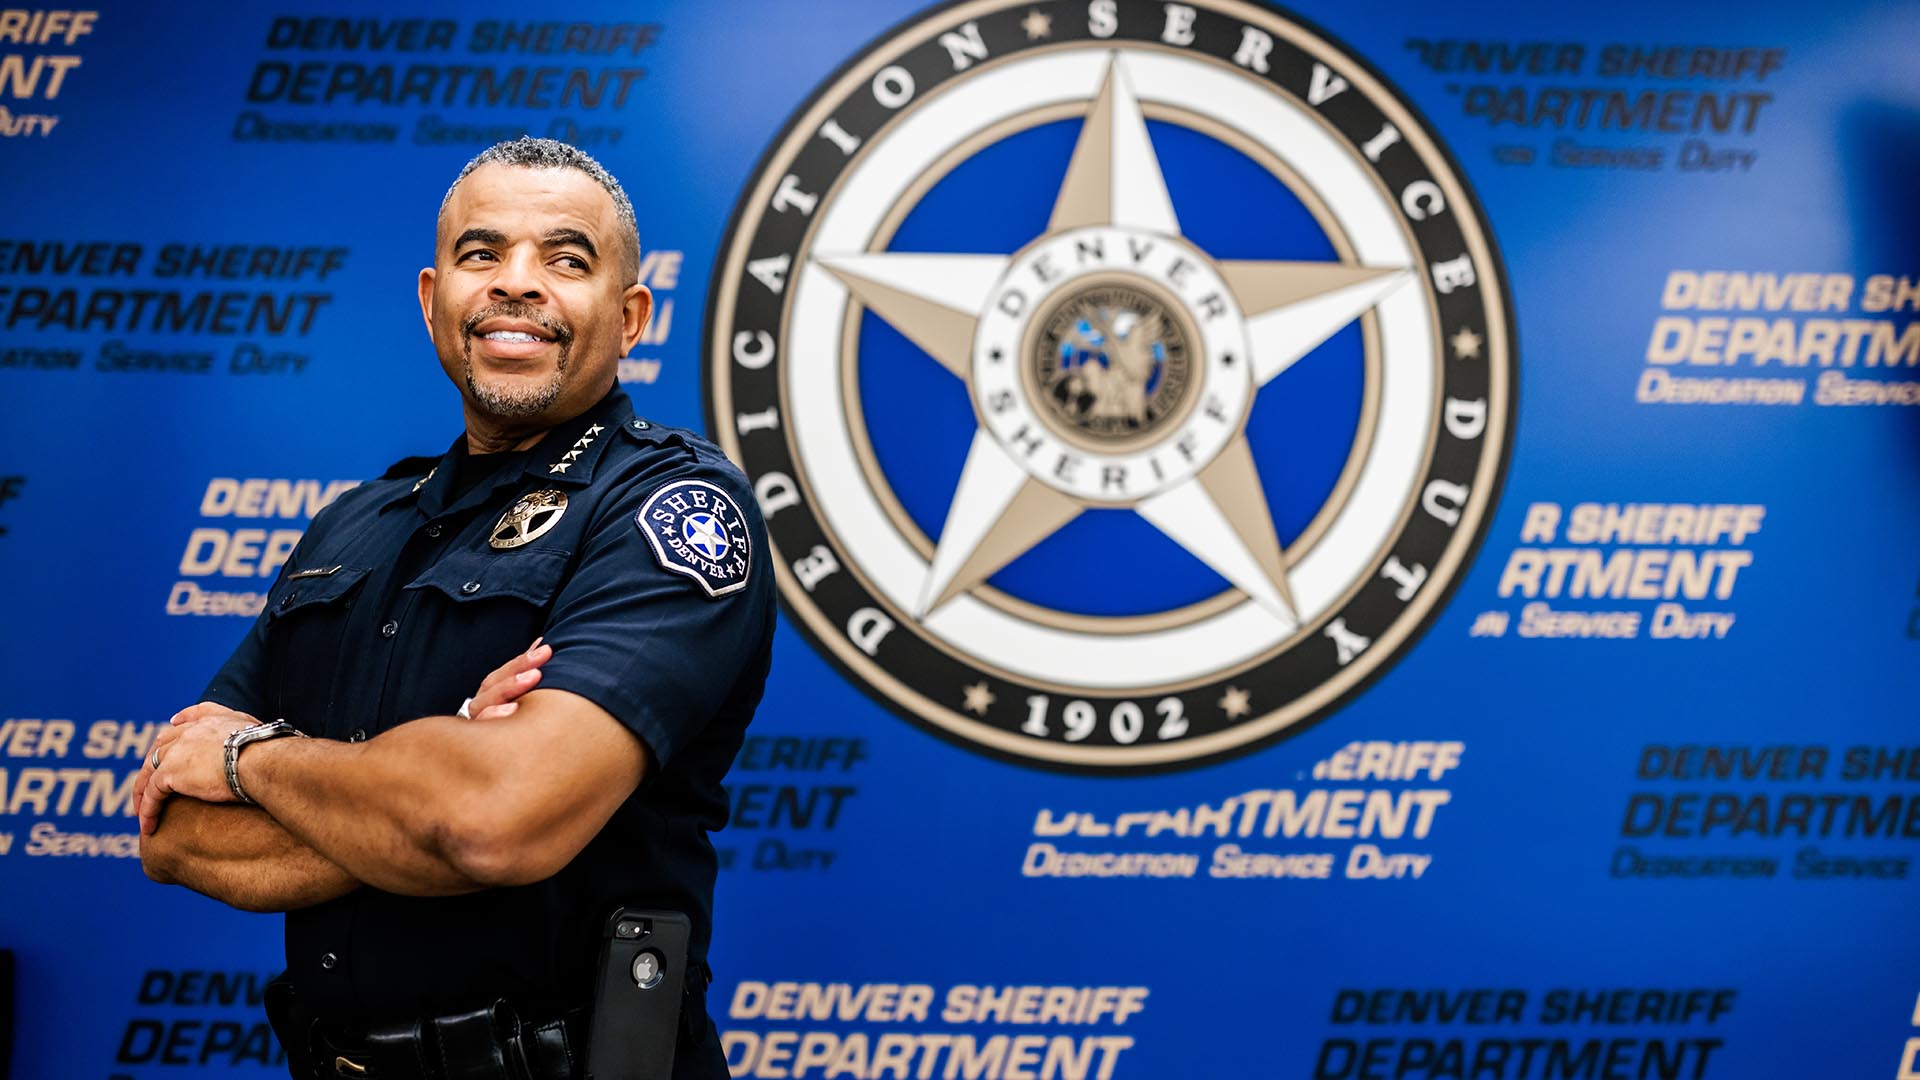 Commencement speaker Sheriff Elias Diggins is an advocate for mental health